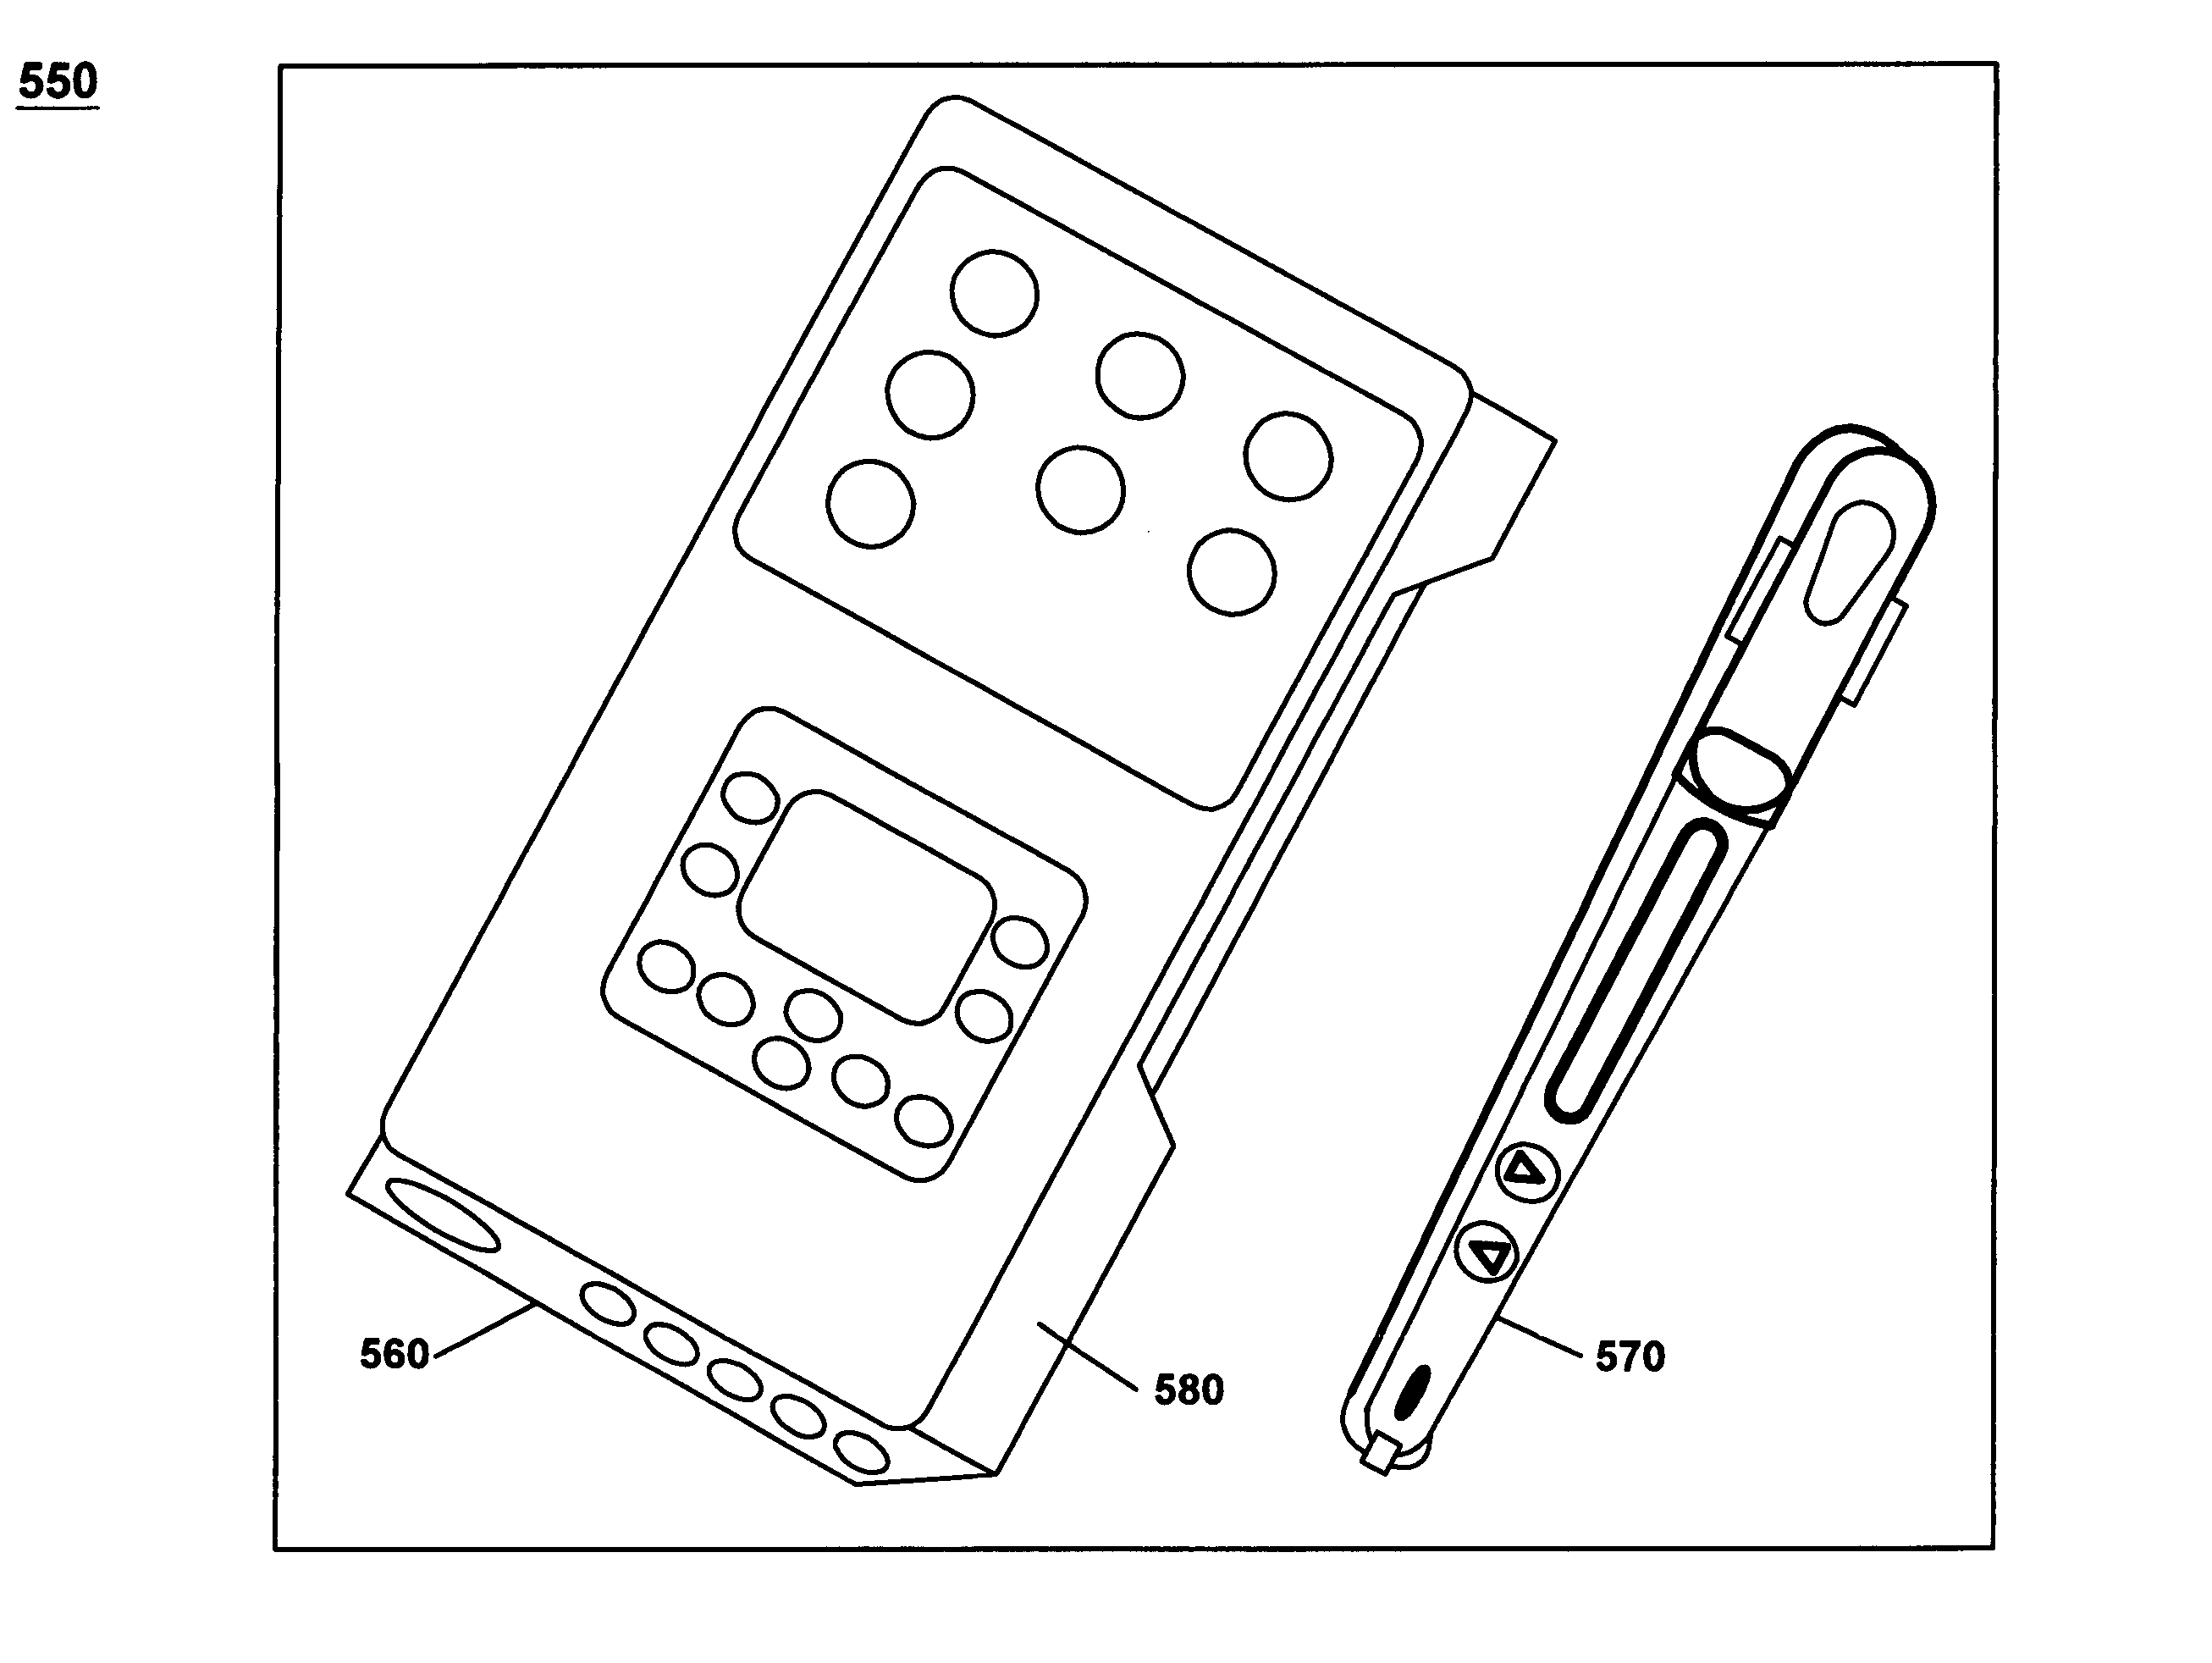 Compact removable voice handset for an integrated portable computer system/mobile phone